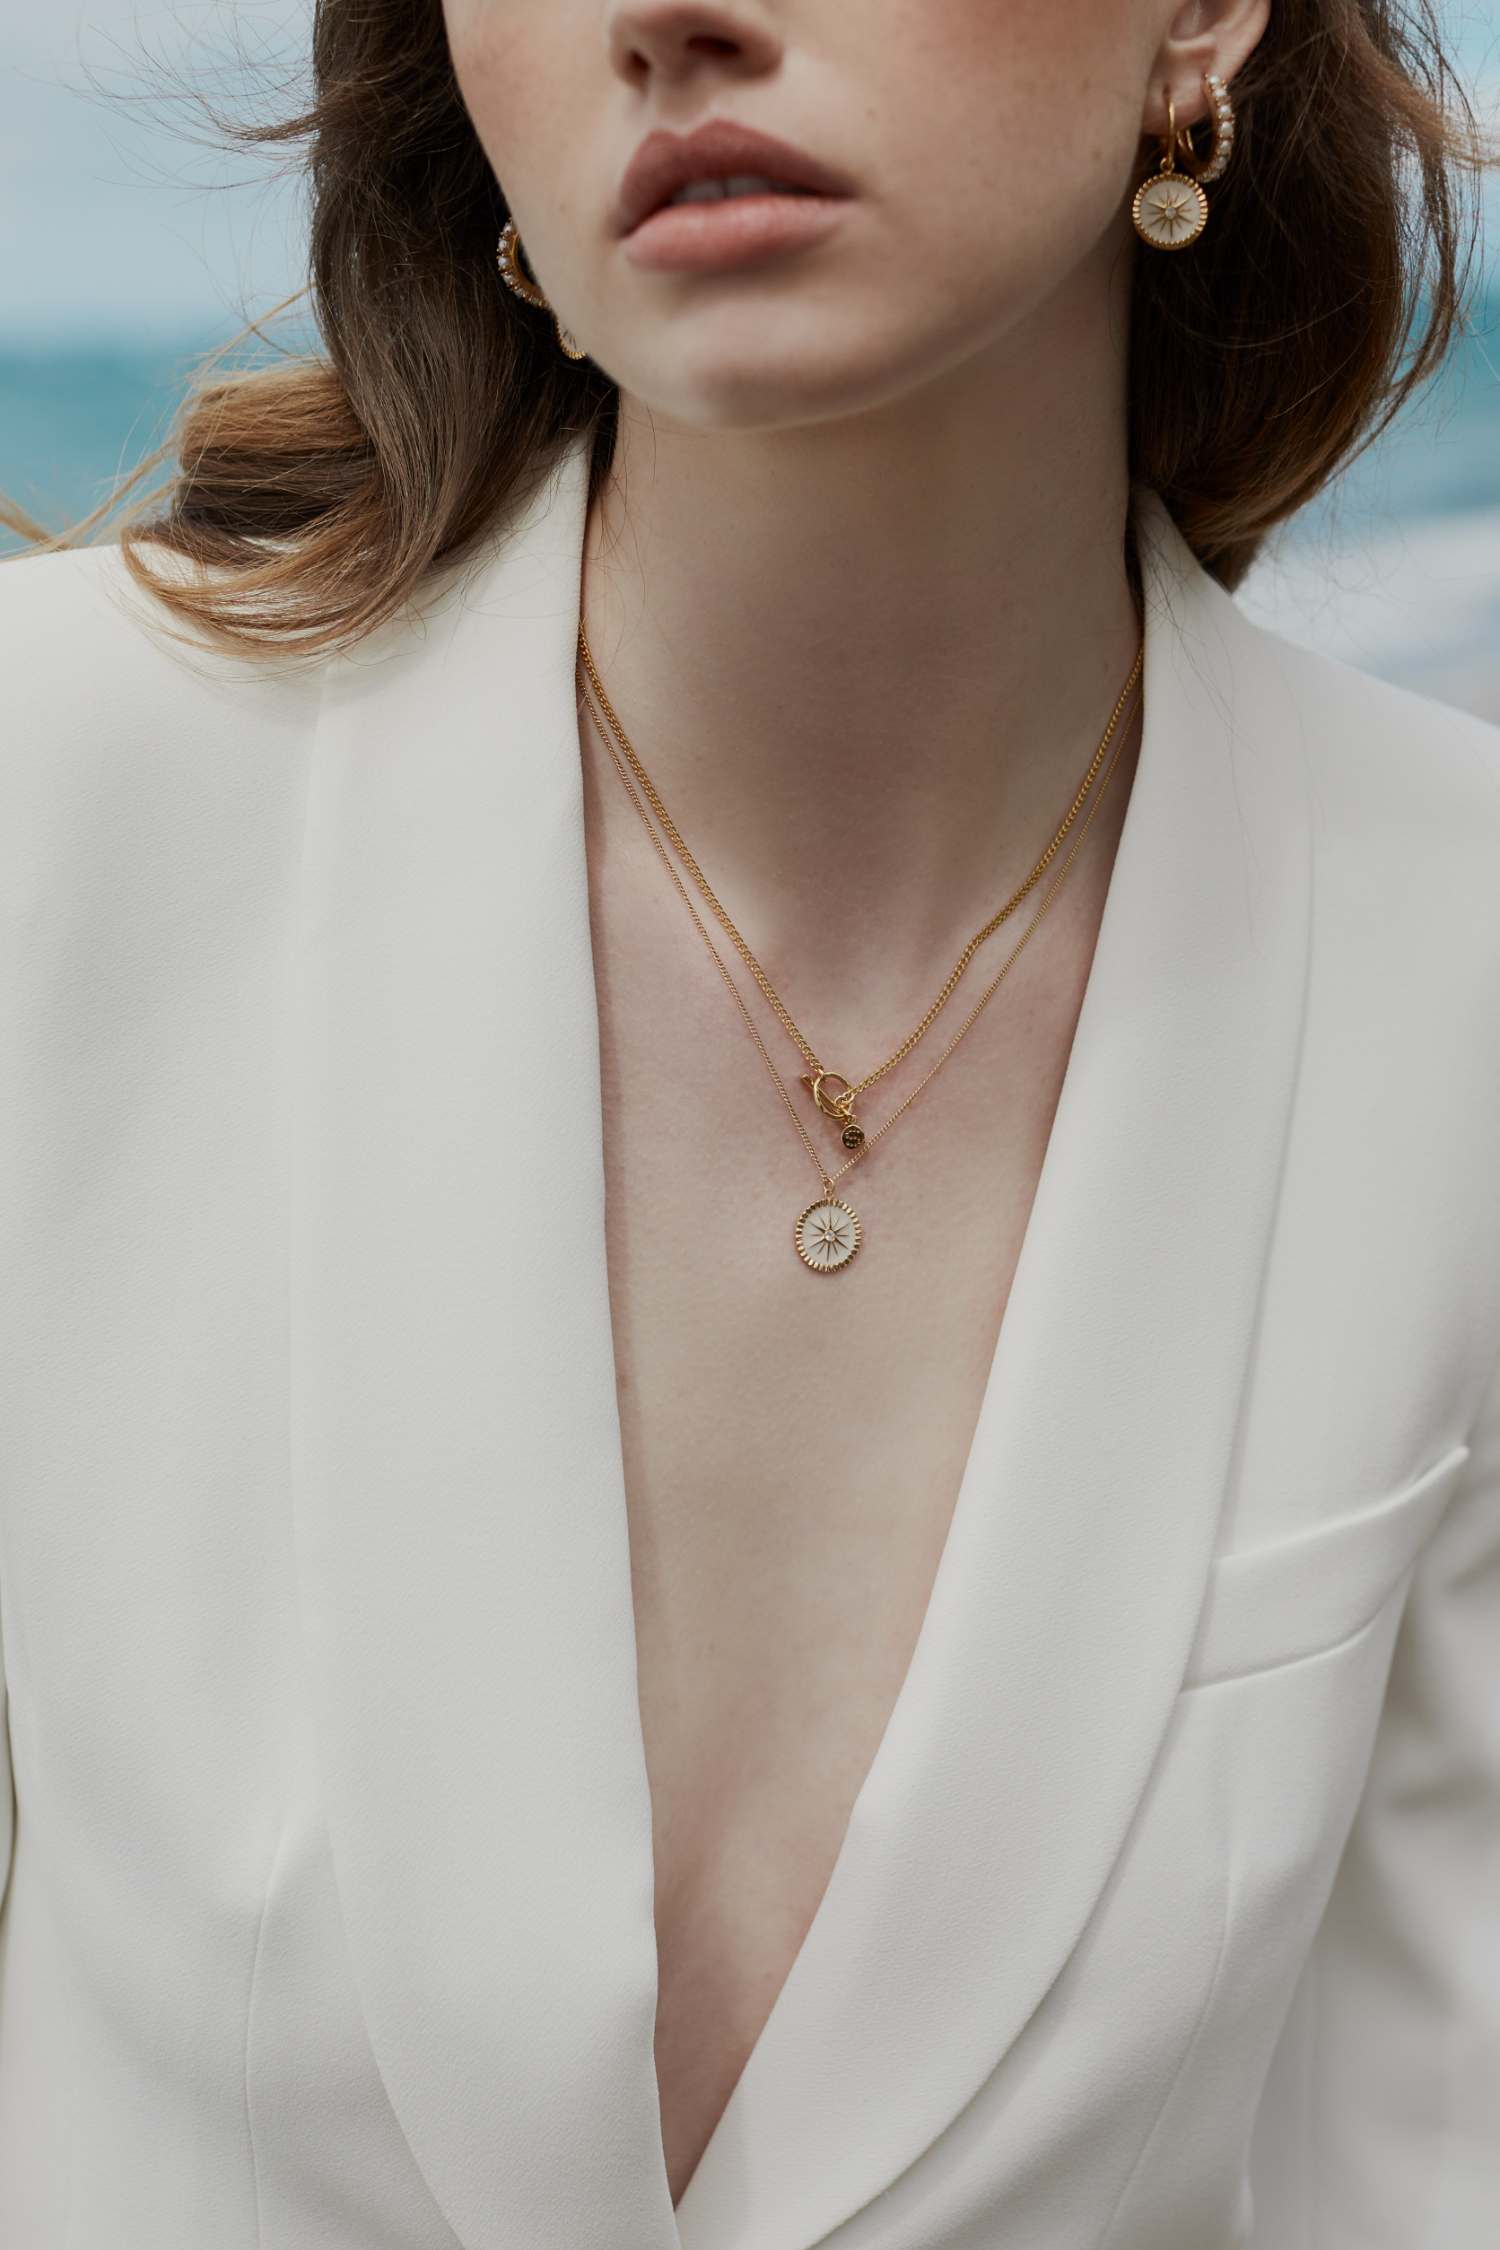 Jewellery styling tops - how to wear fine necklaces